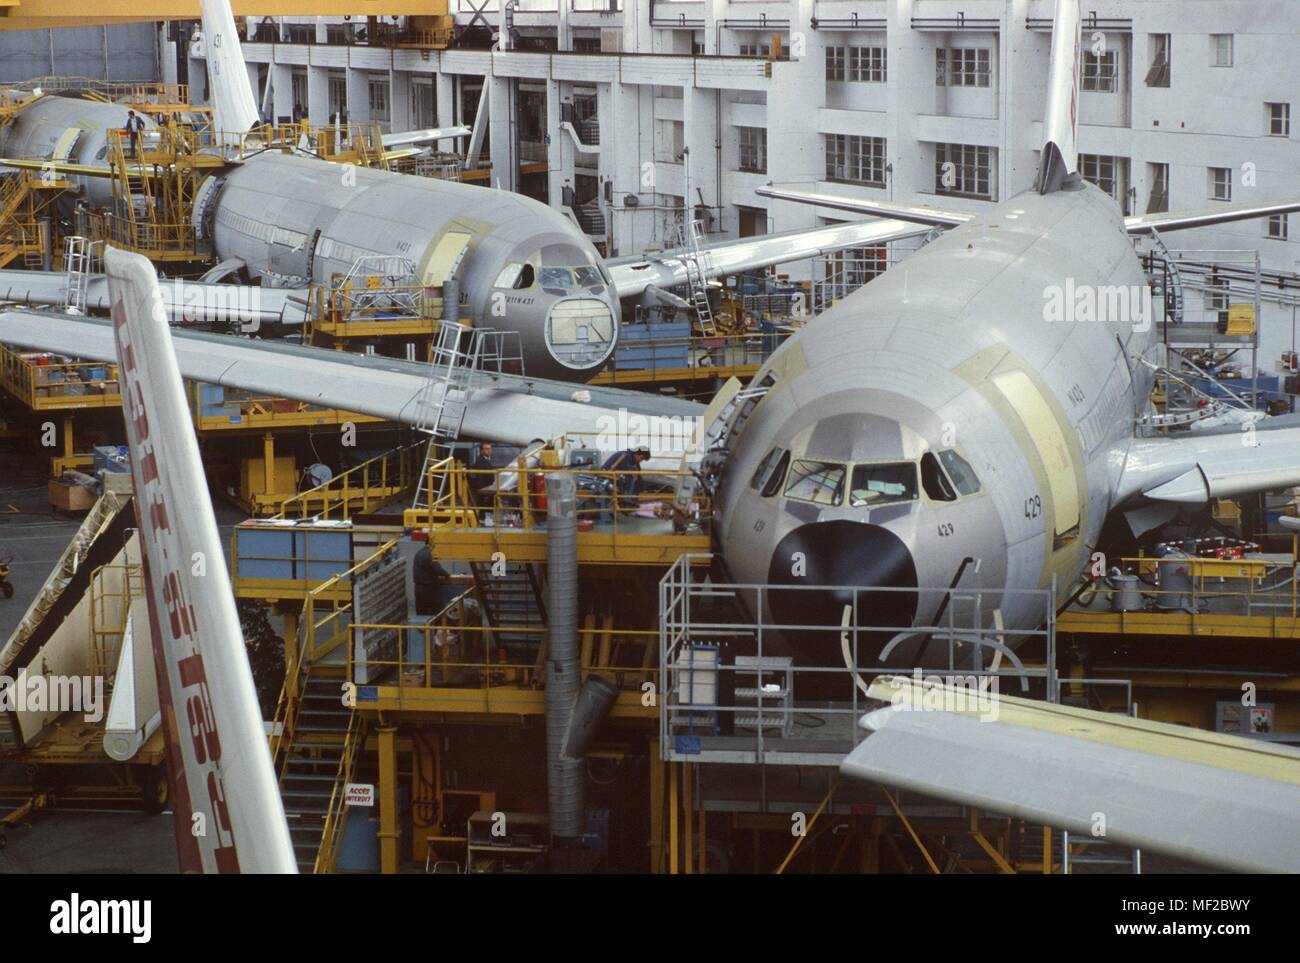 View of the final assembly hall of Airbus 'Aerospatiale partner in Toulouse, where Airbus' A300 and A320 aircraft are completed. (Photograph from 1986). | usage worldwide Stock Photo